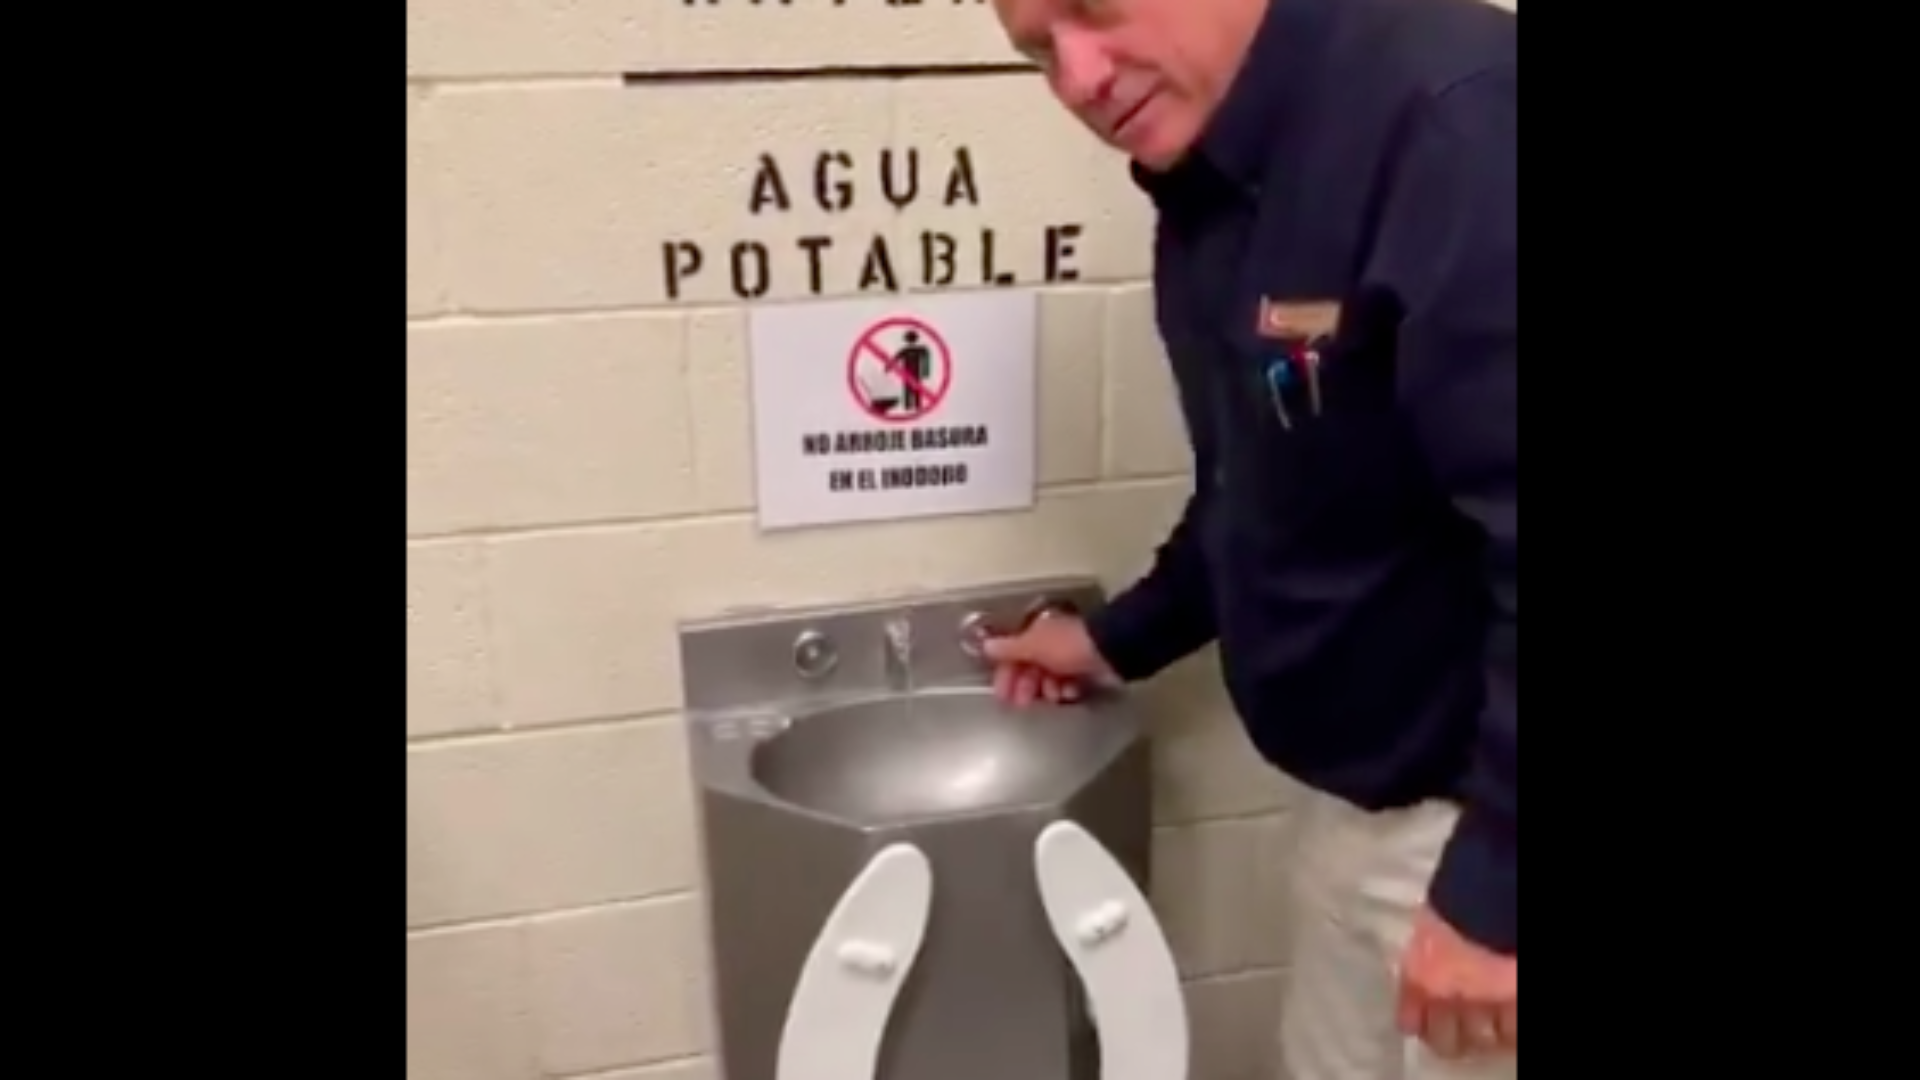 Rep. Steve King Claims Water From Toilet Fountain At Border Facility Was 'Actually Pretty Good'